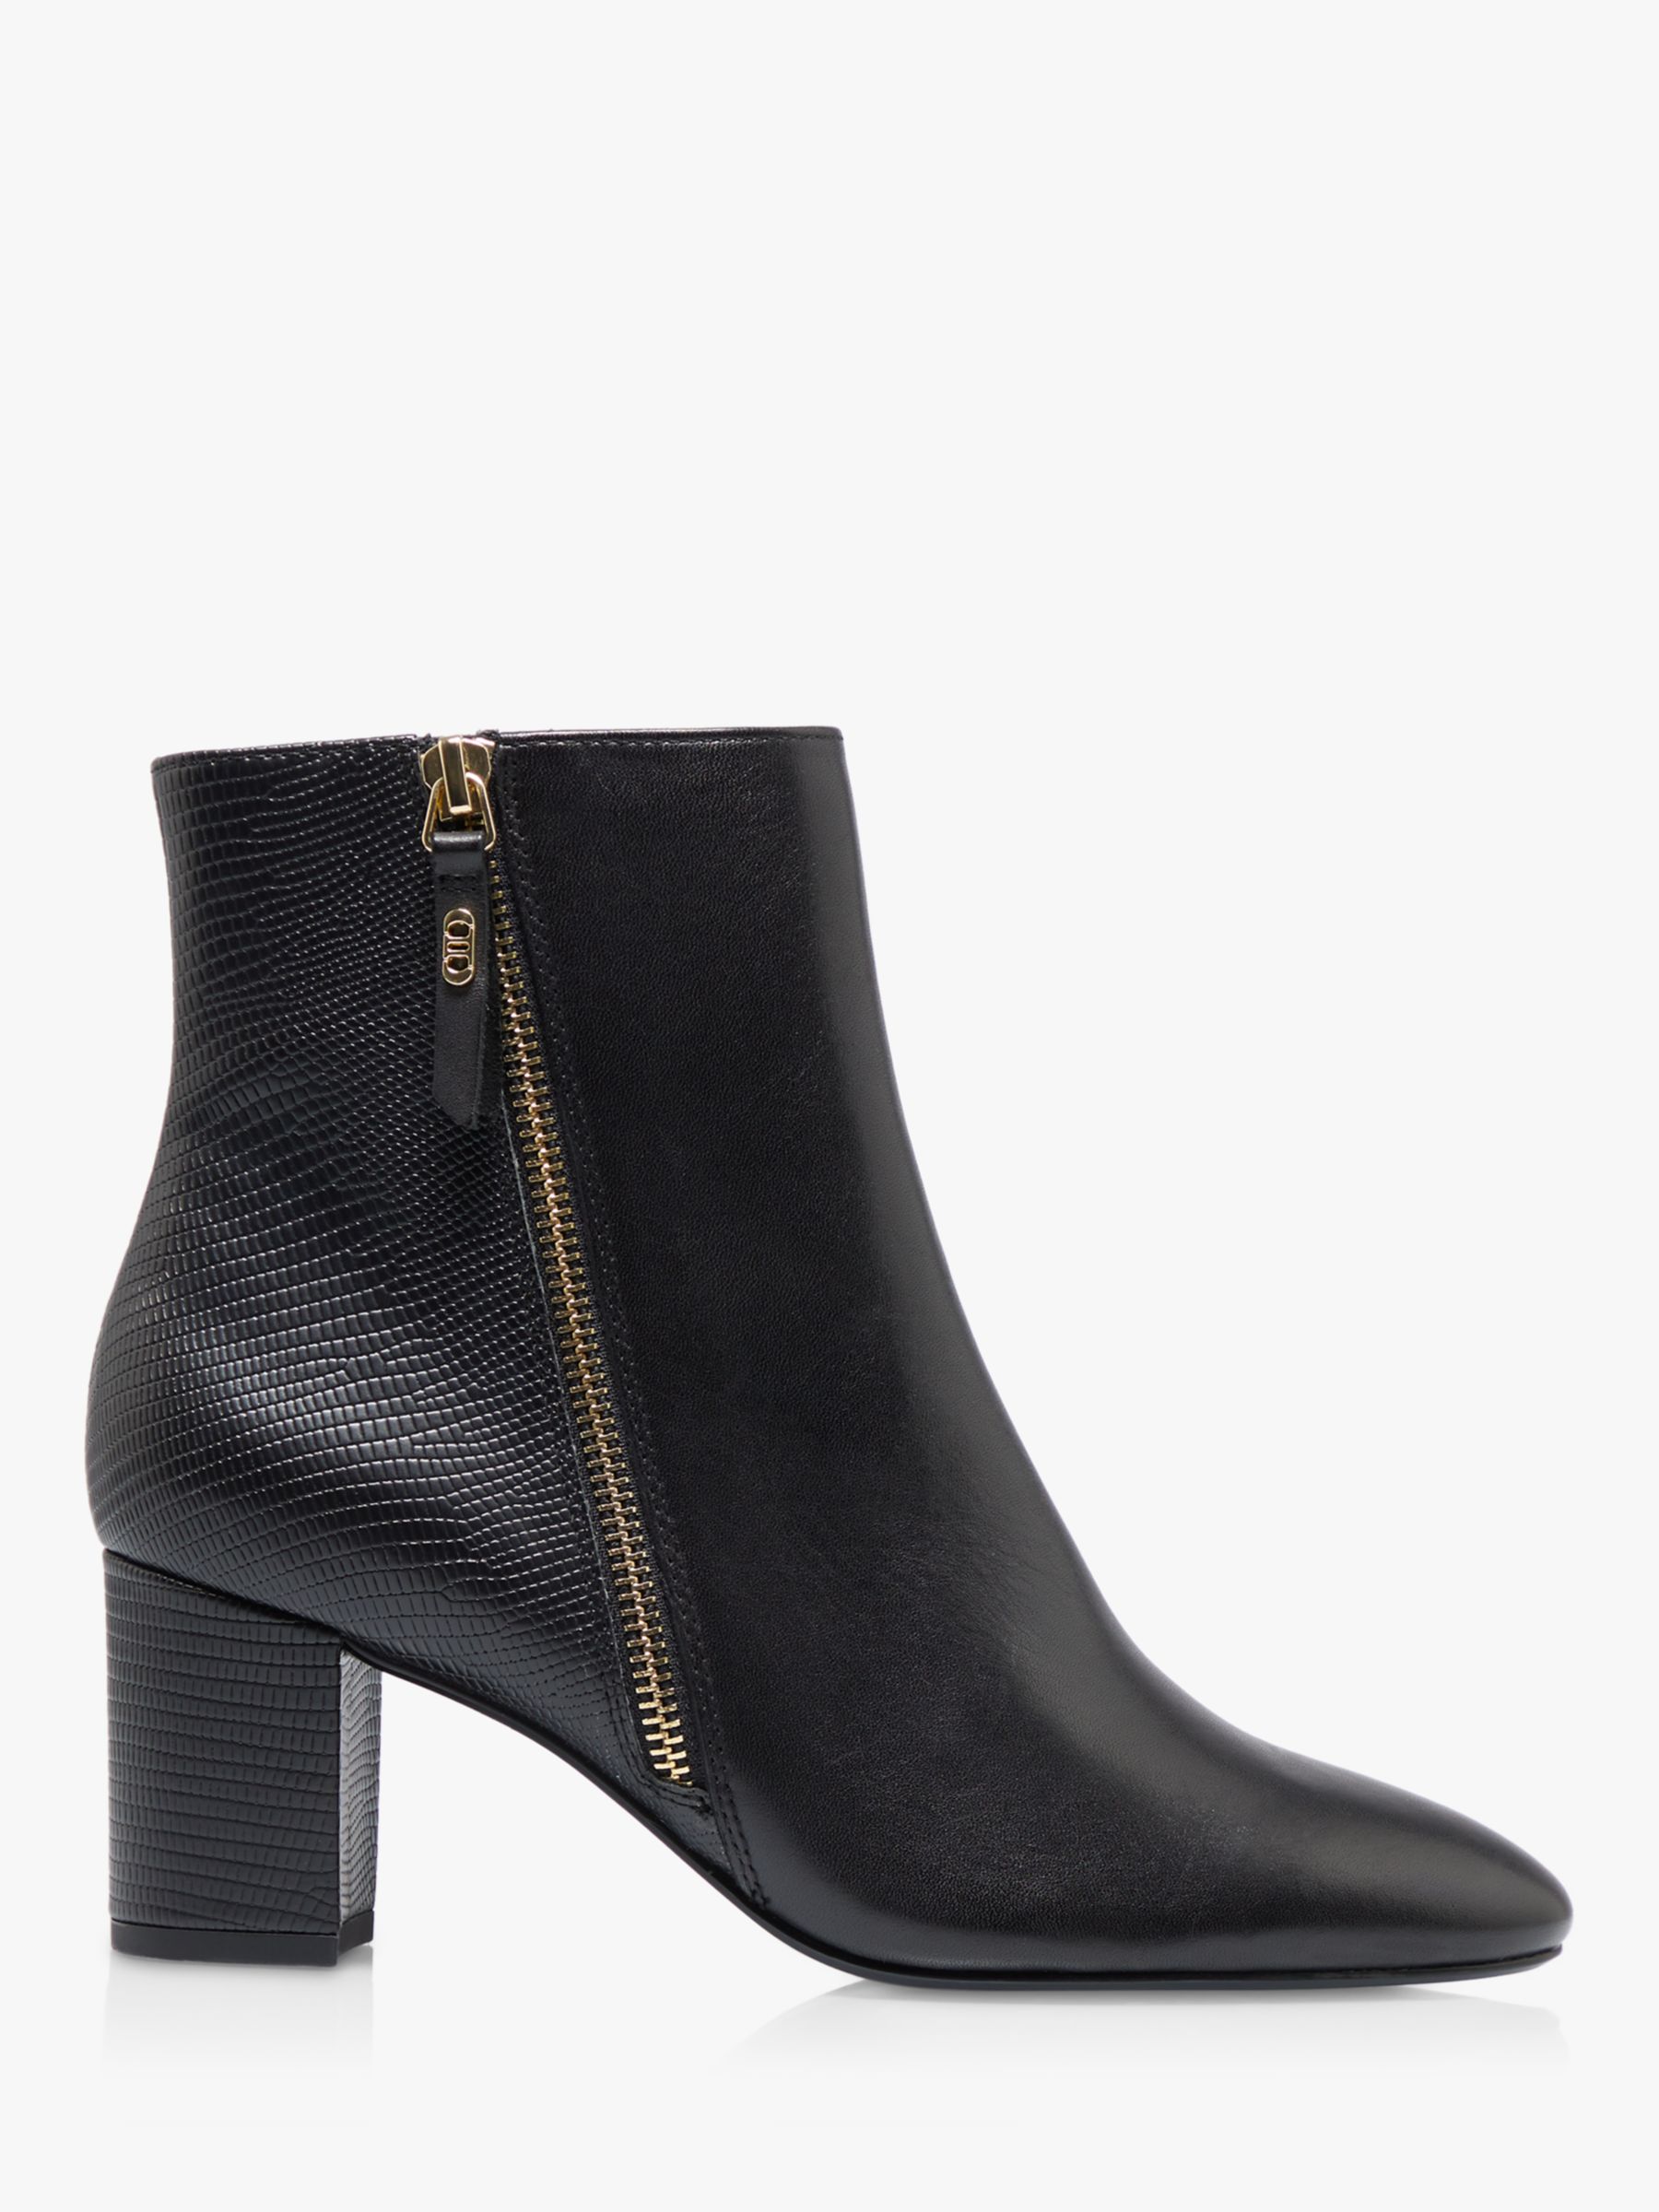 Dune Oricle Leather Side Zip Block Heel Ankle Boots, Black at John ...